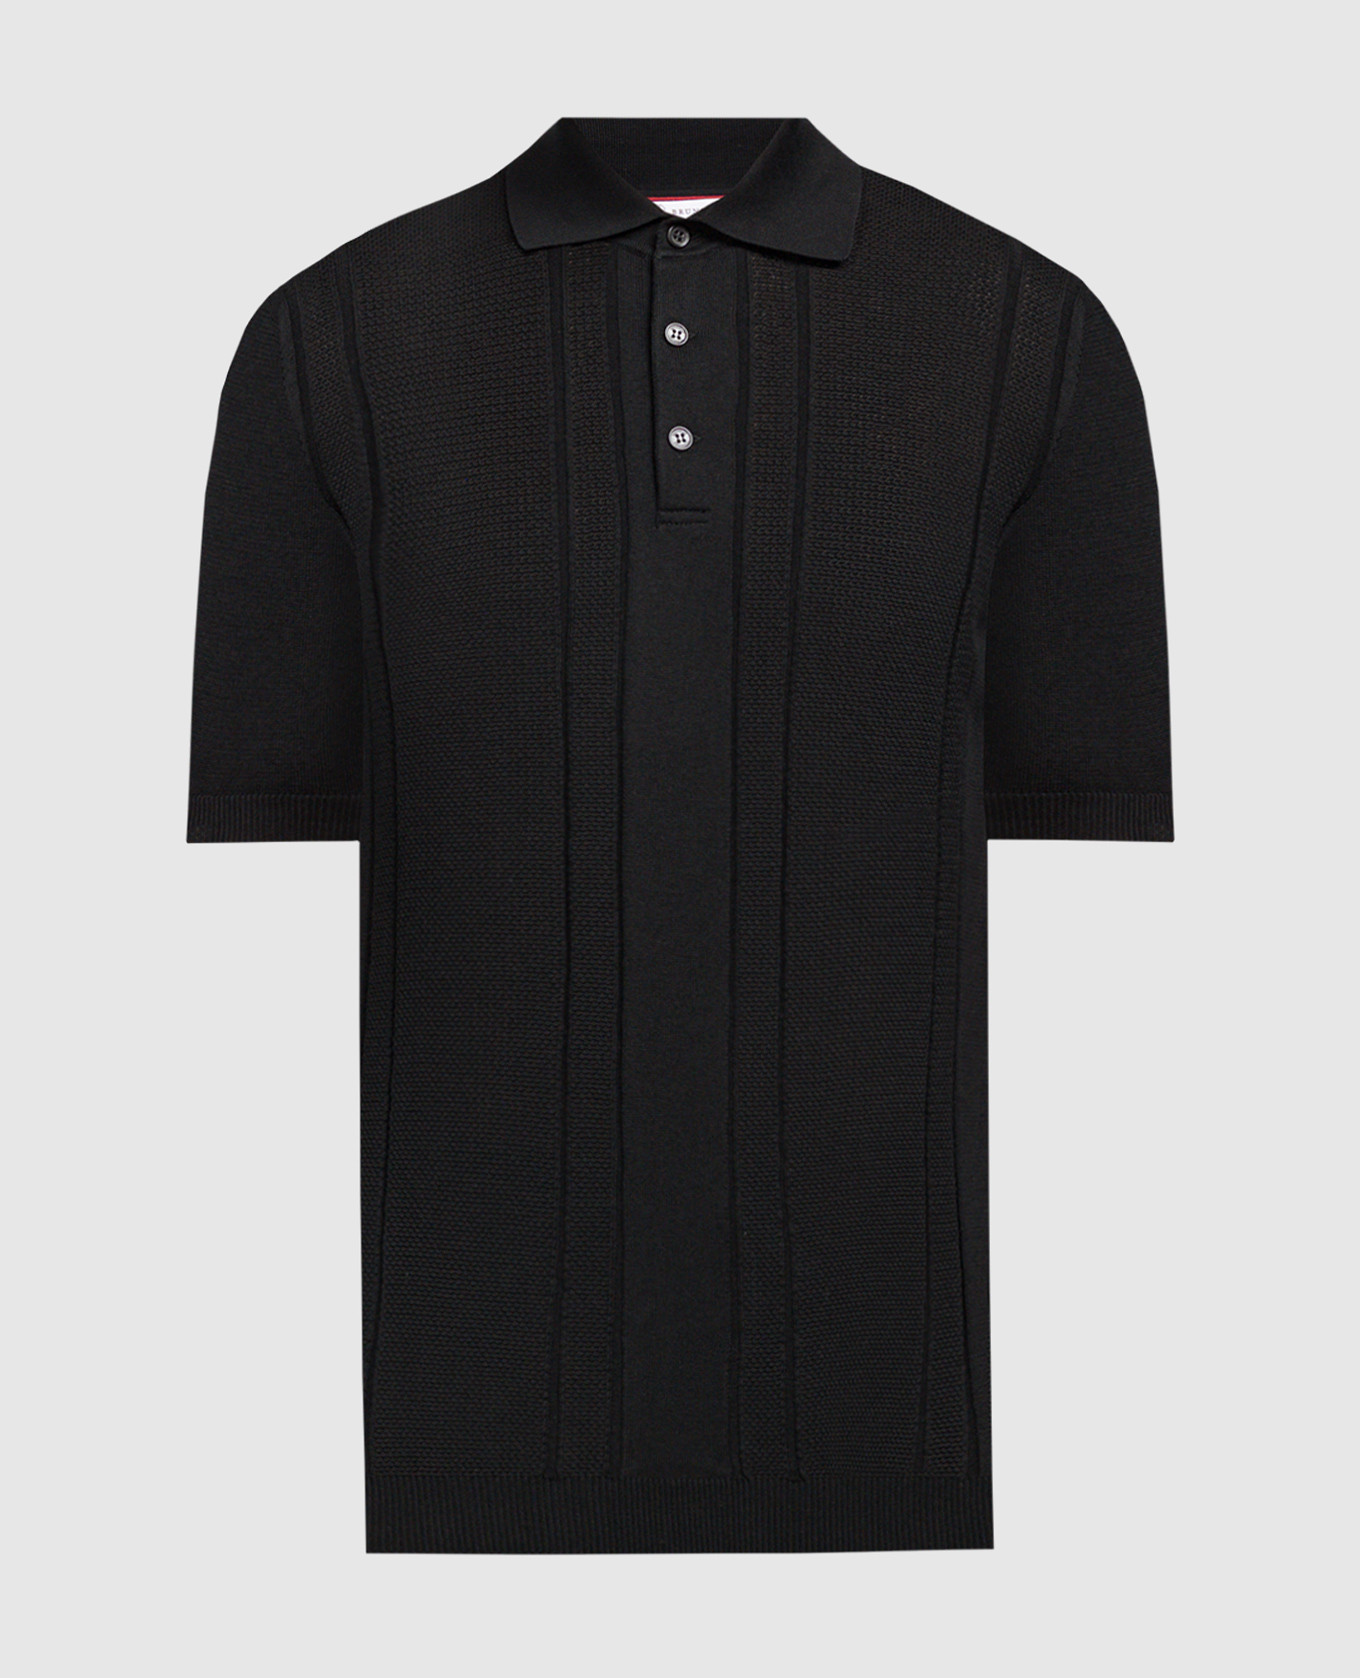 Black polo in a woven pattern